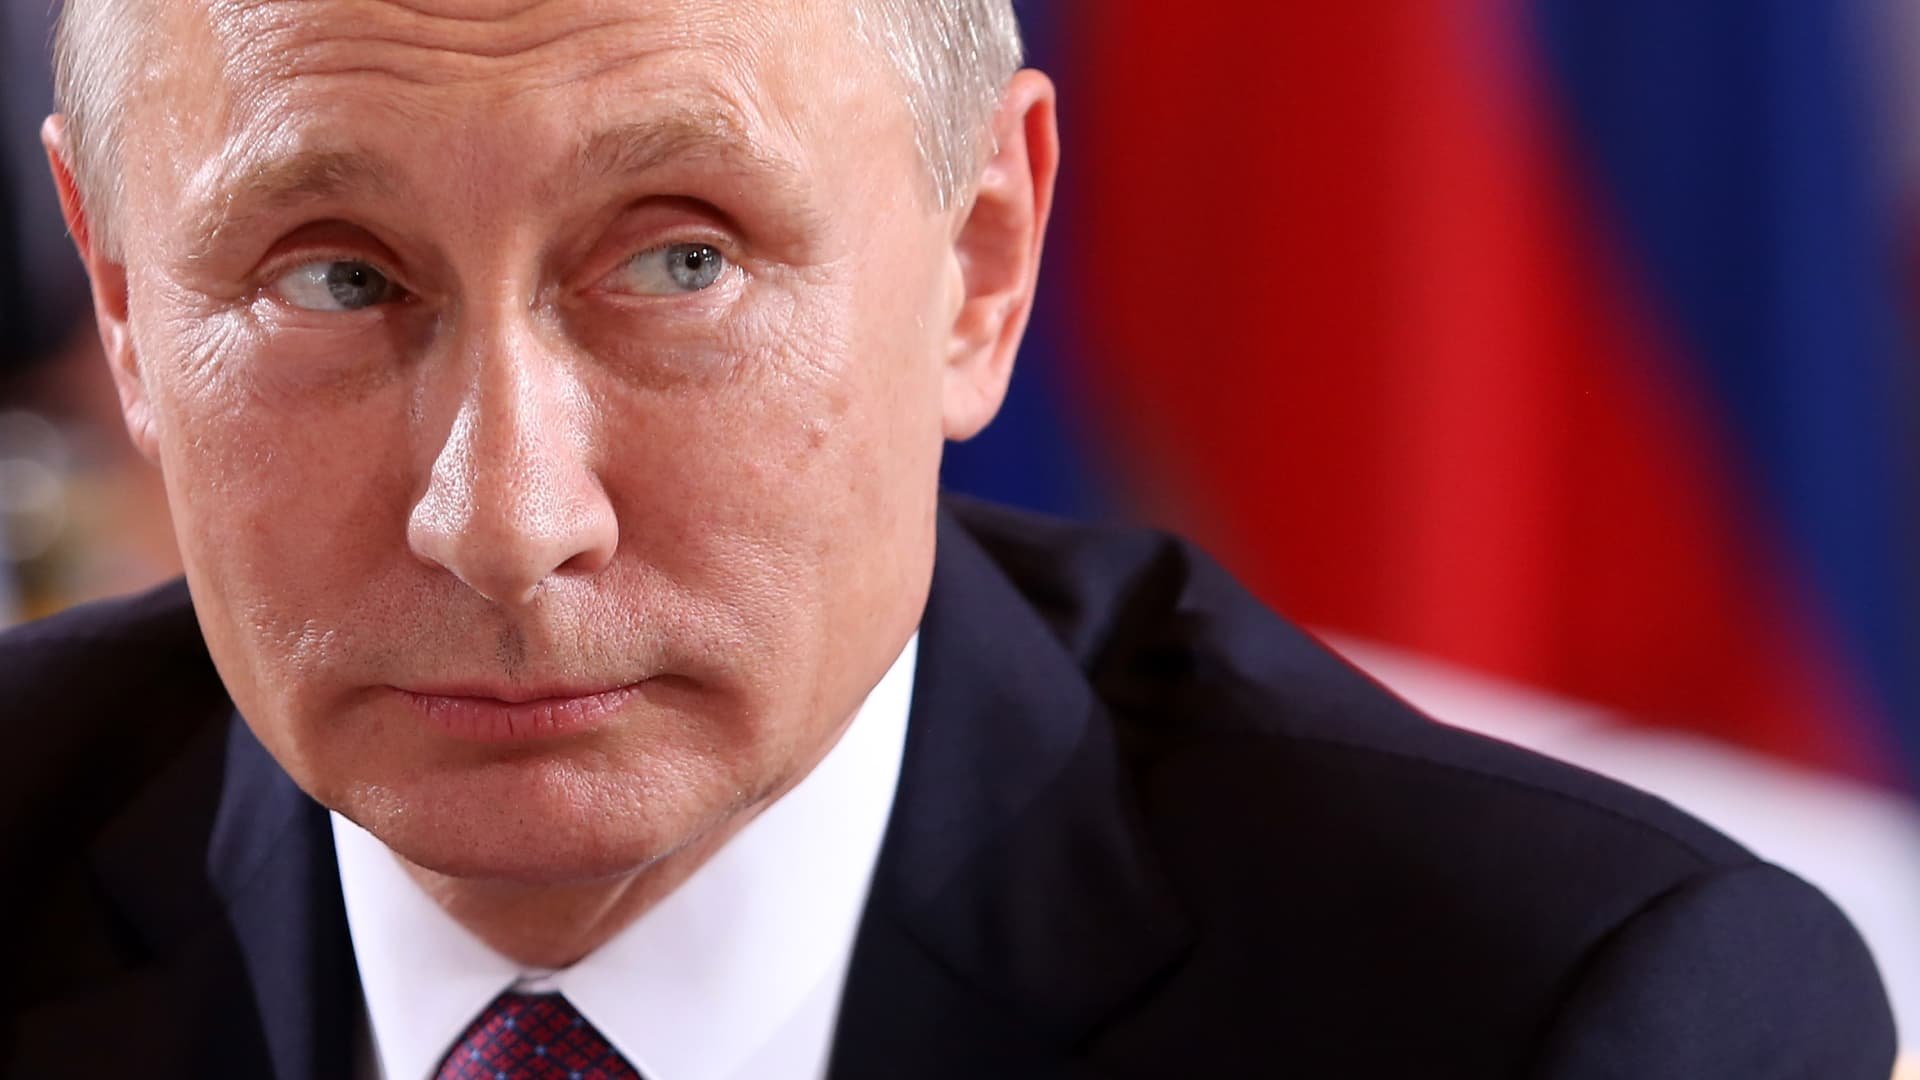 Now that Russia has invaded Ukraine, the West has to try to stop Putin — but how?